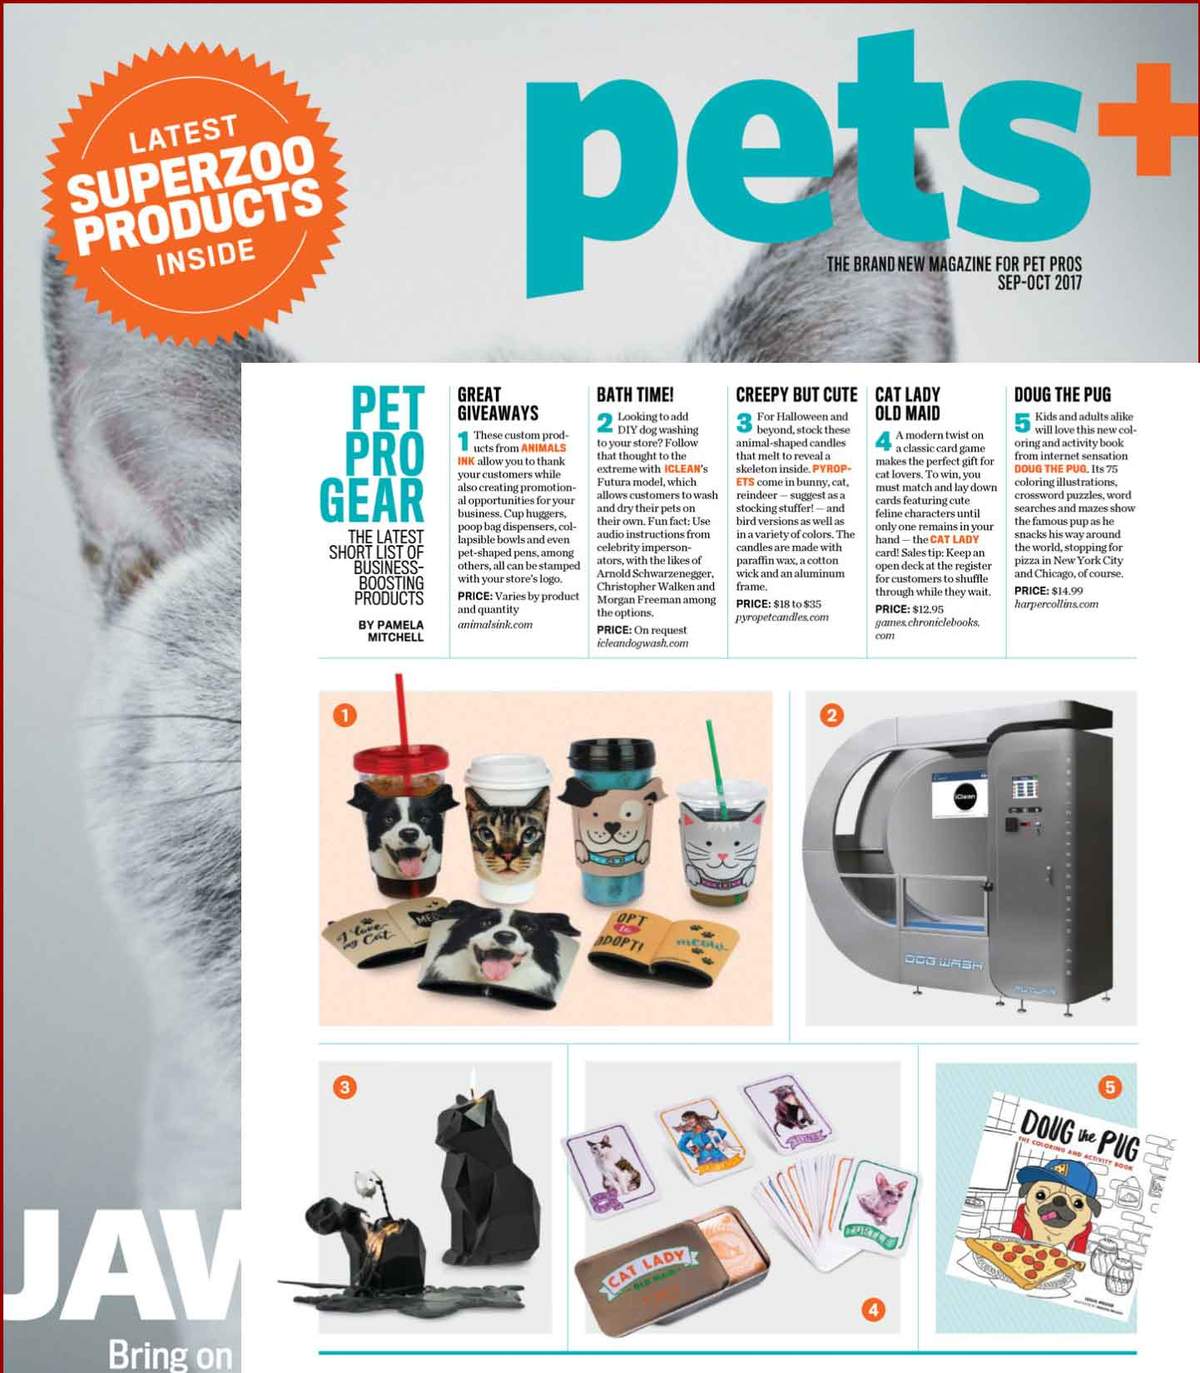 Pyropets featured in Pets+ Magazine September/October 2017 Issue